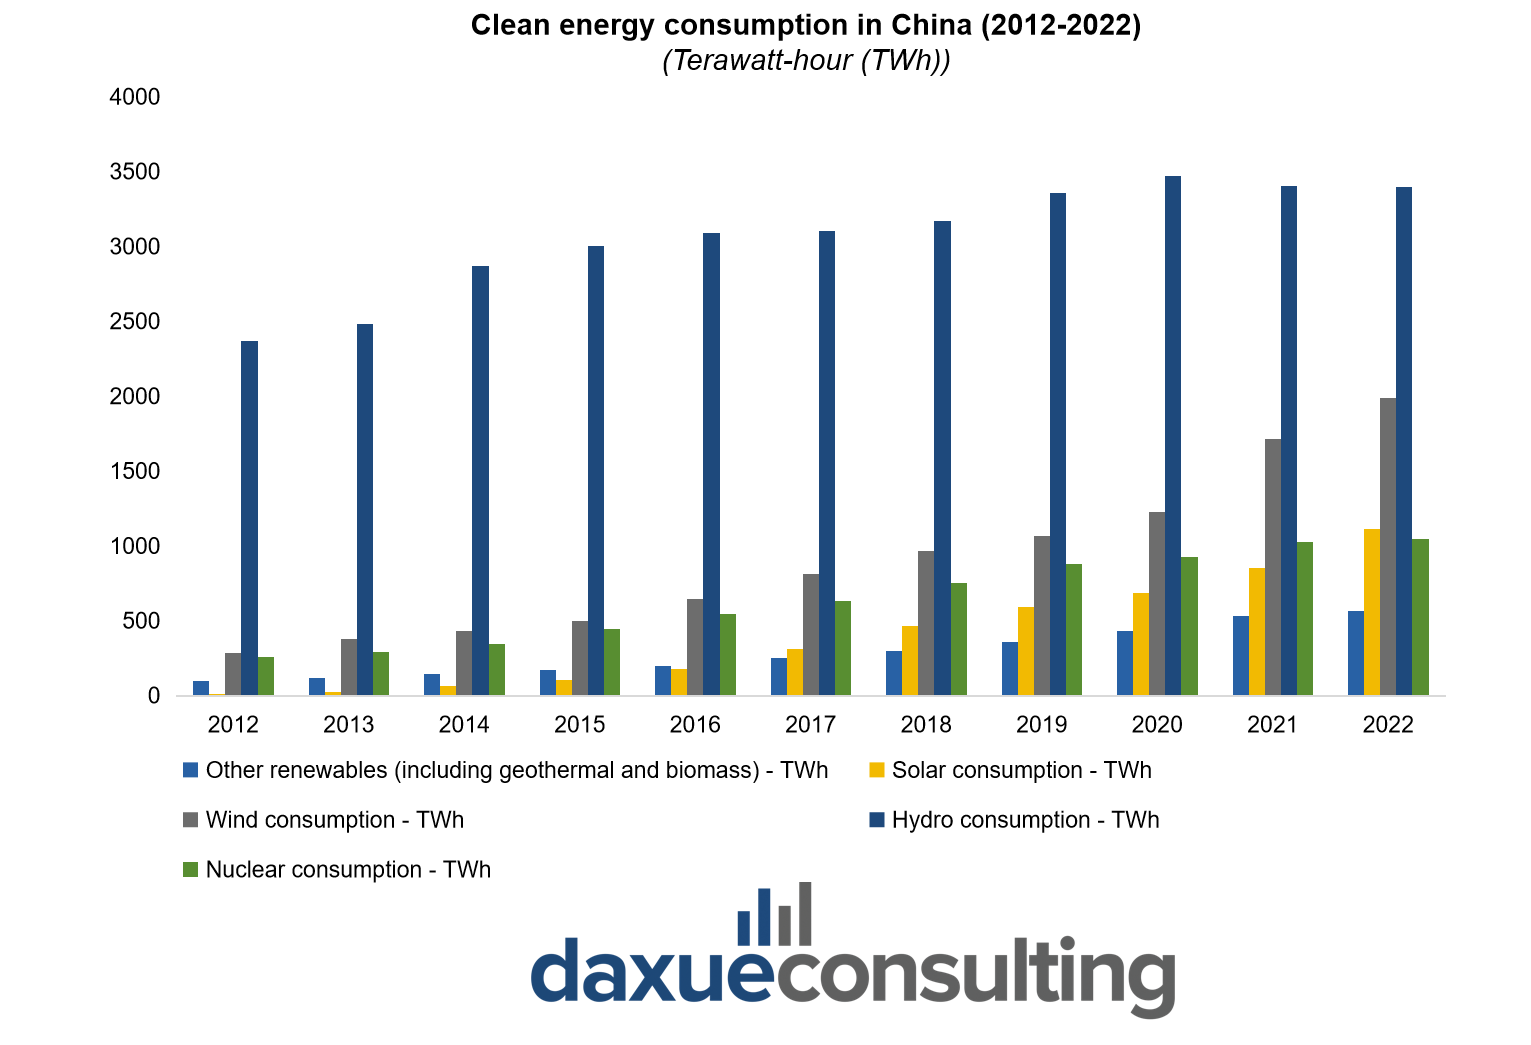 Sustainability in China: Clean energy consumption in China from 2012 to 2022